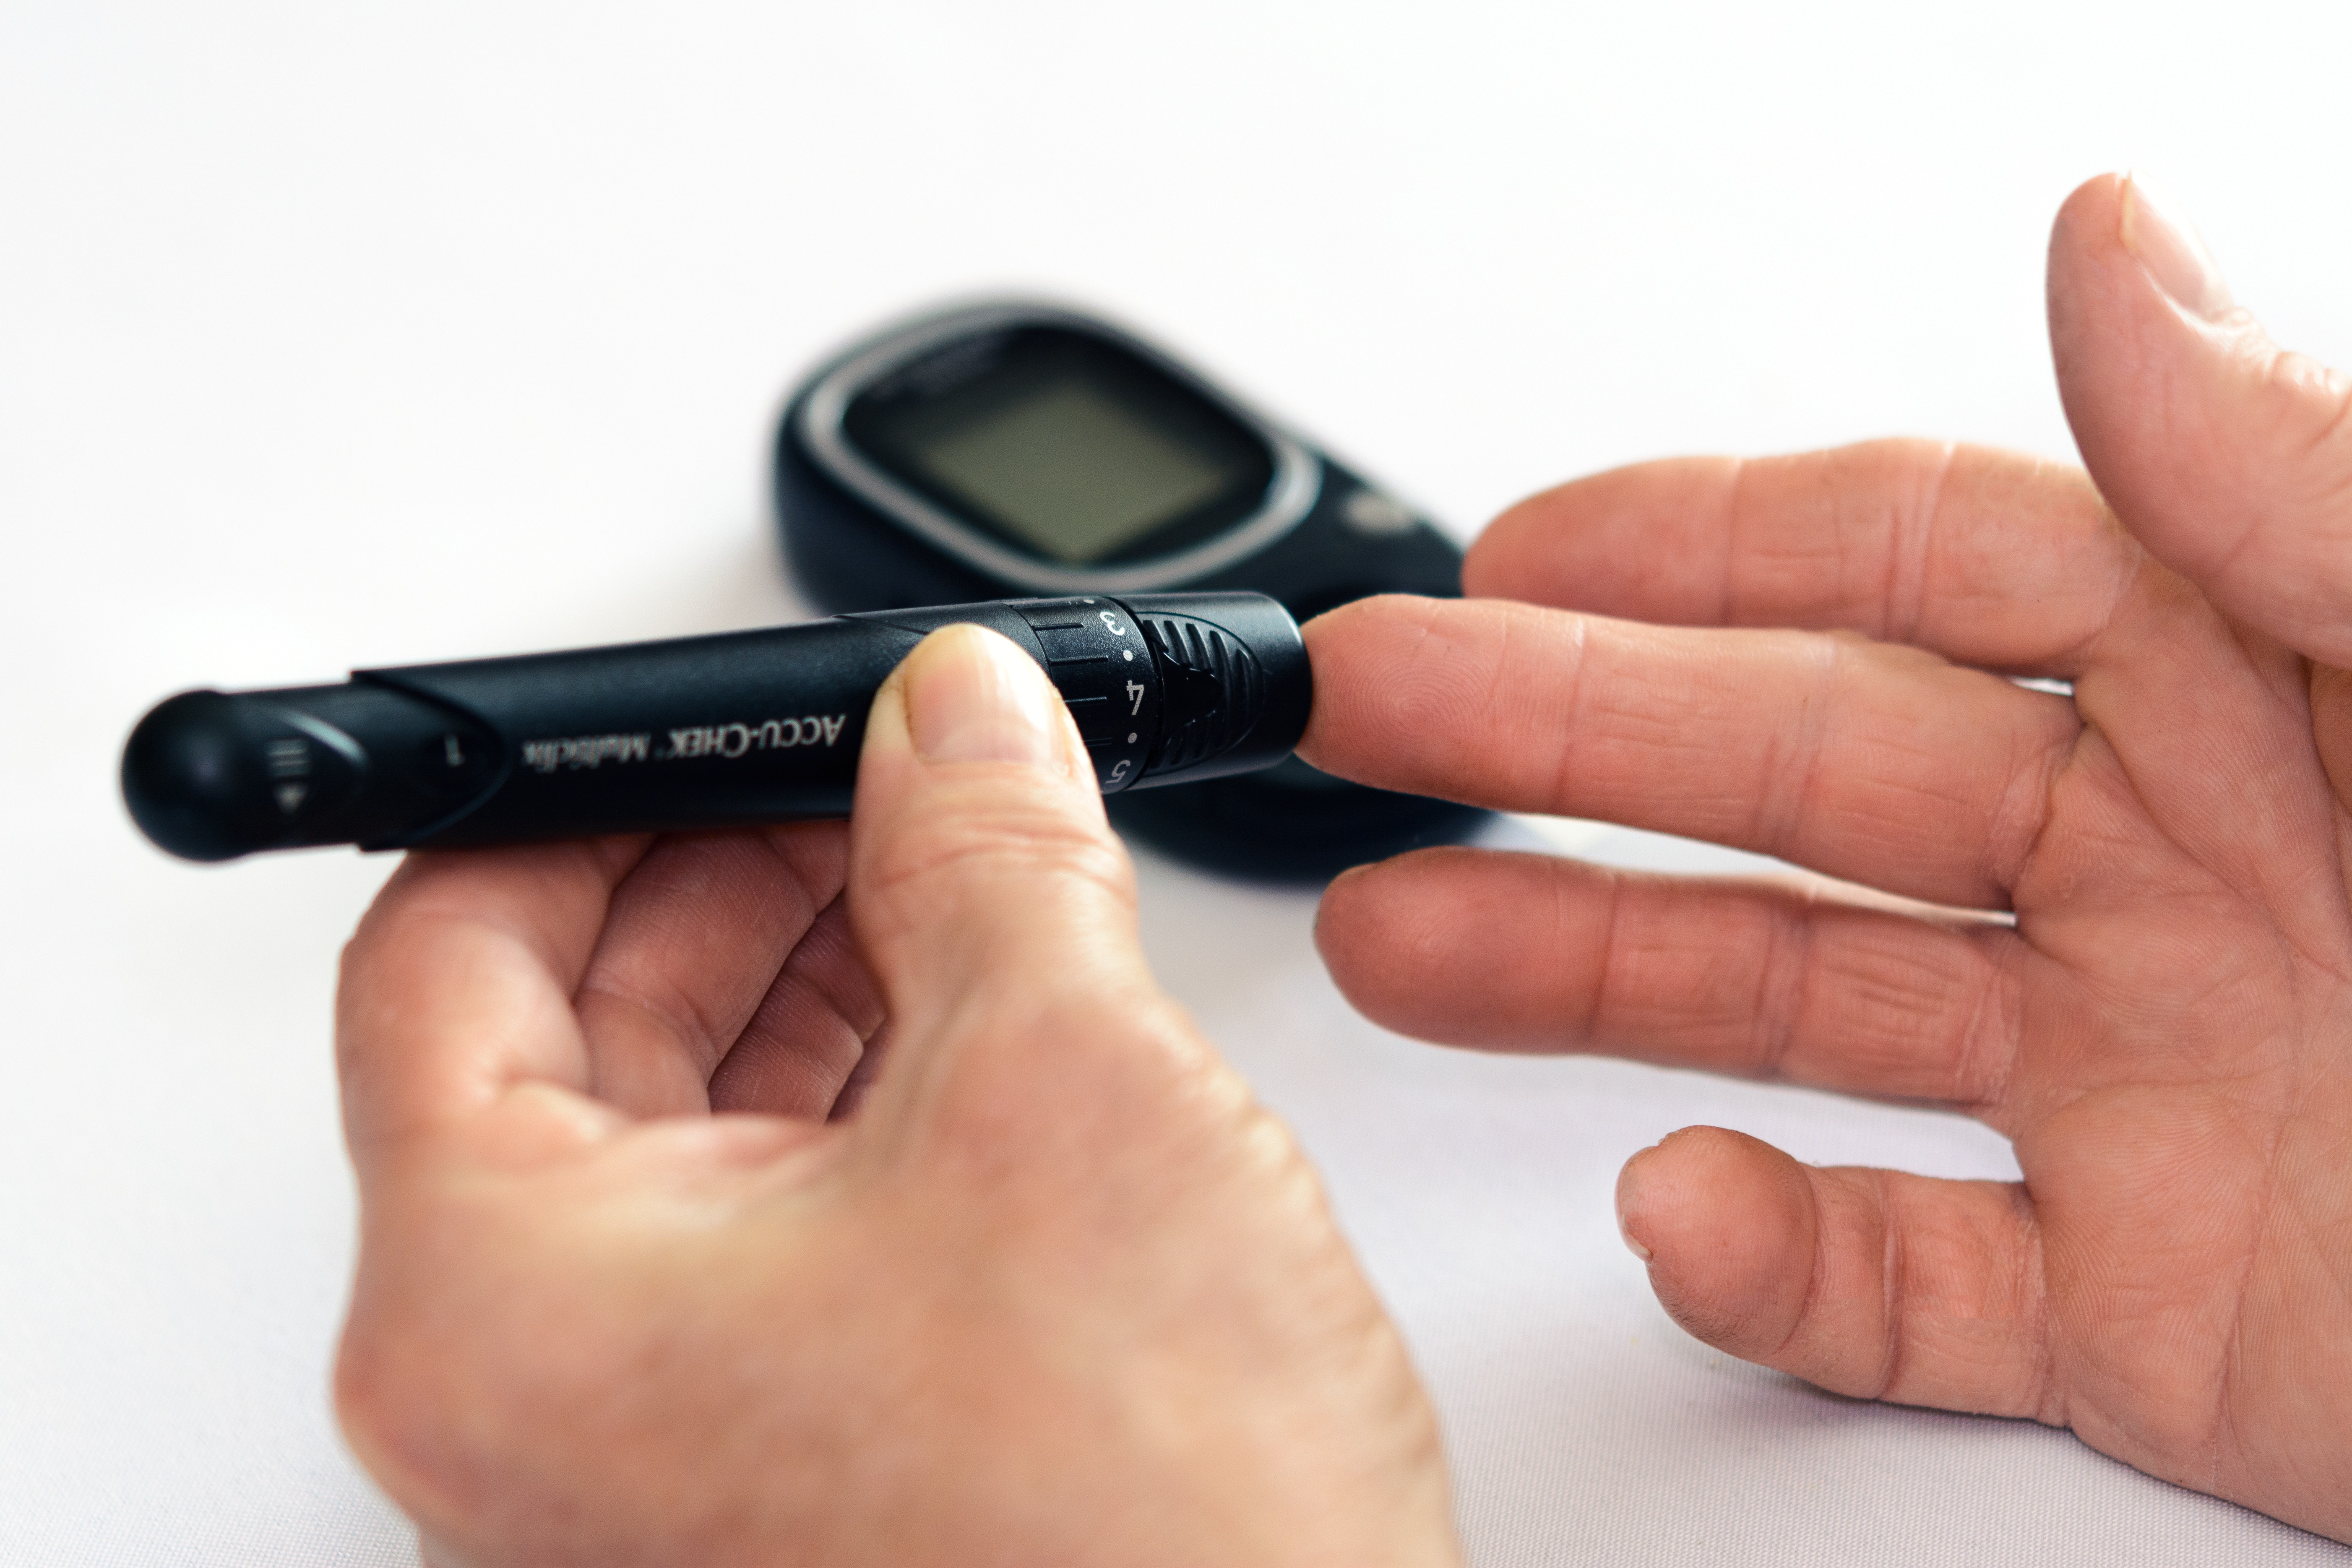 Testing Blood Glucose Levels is a Common Practice to Learn More About Personal Insulin Sensitivity/Levels